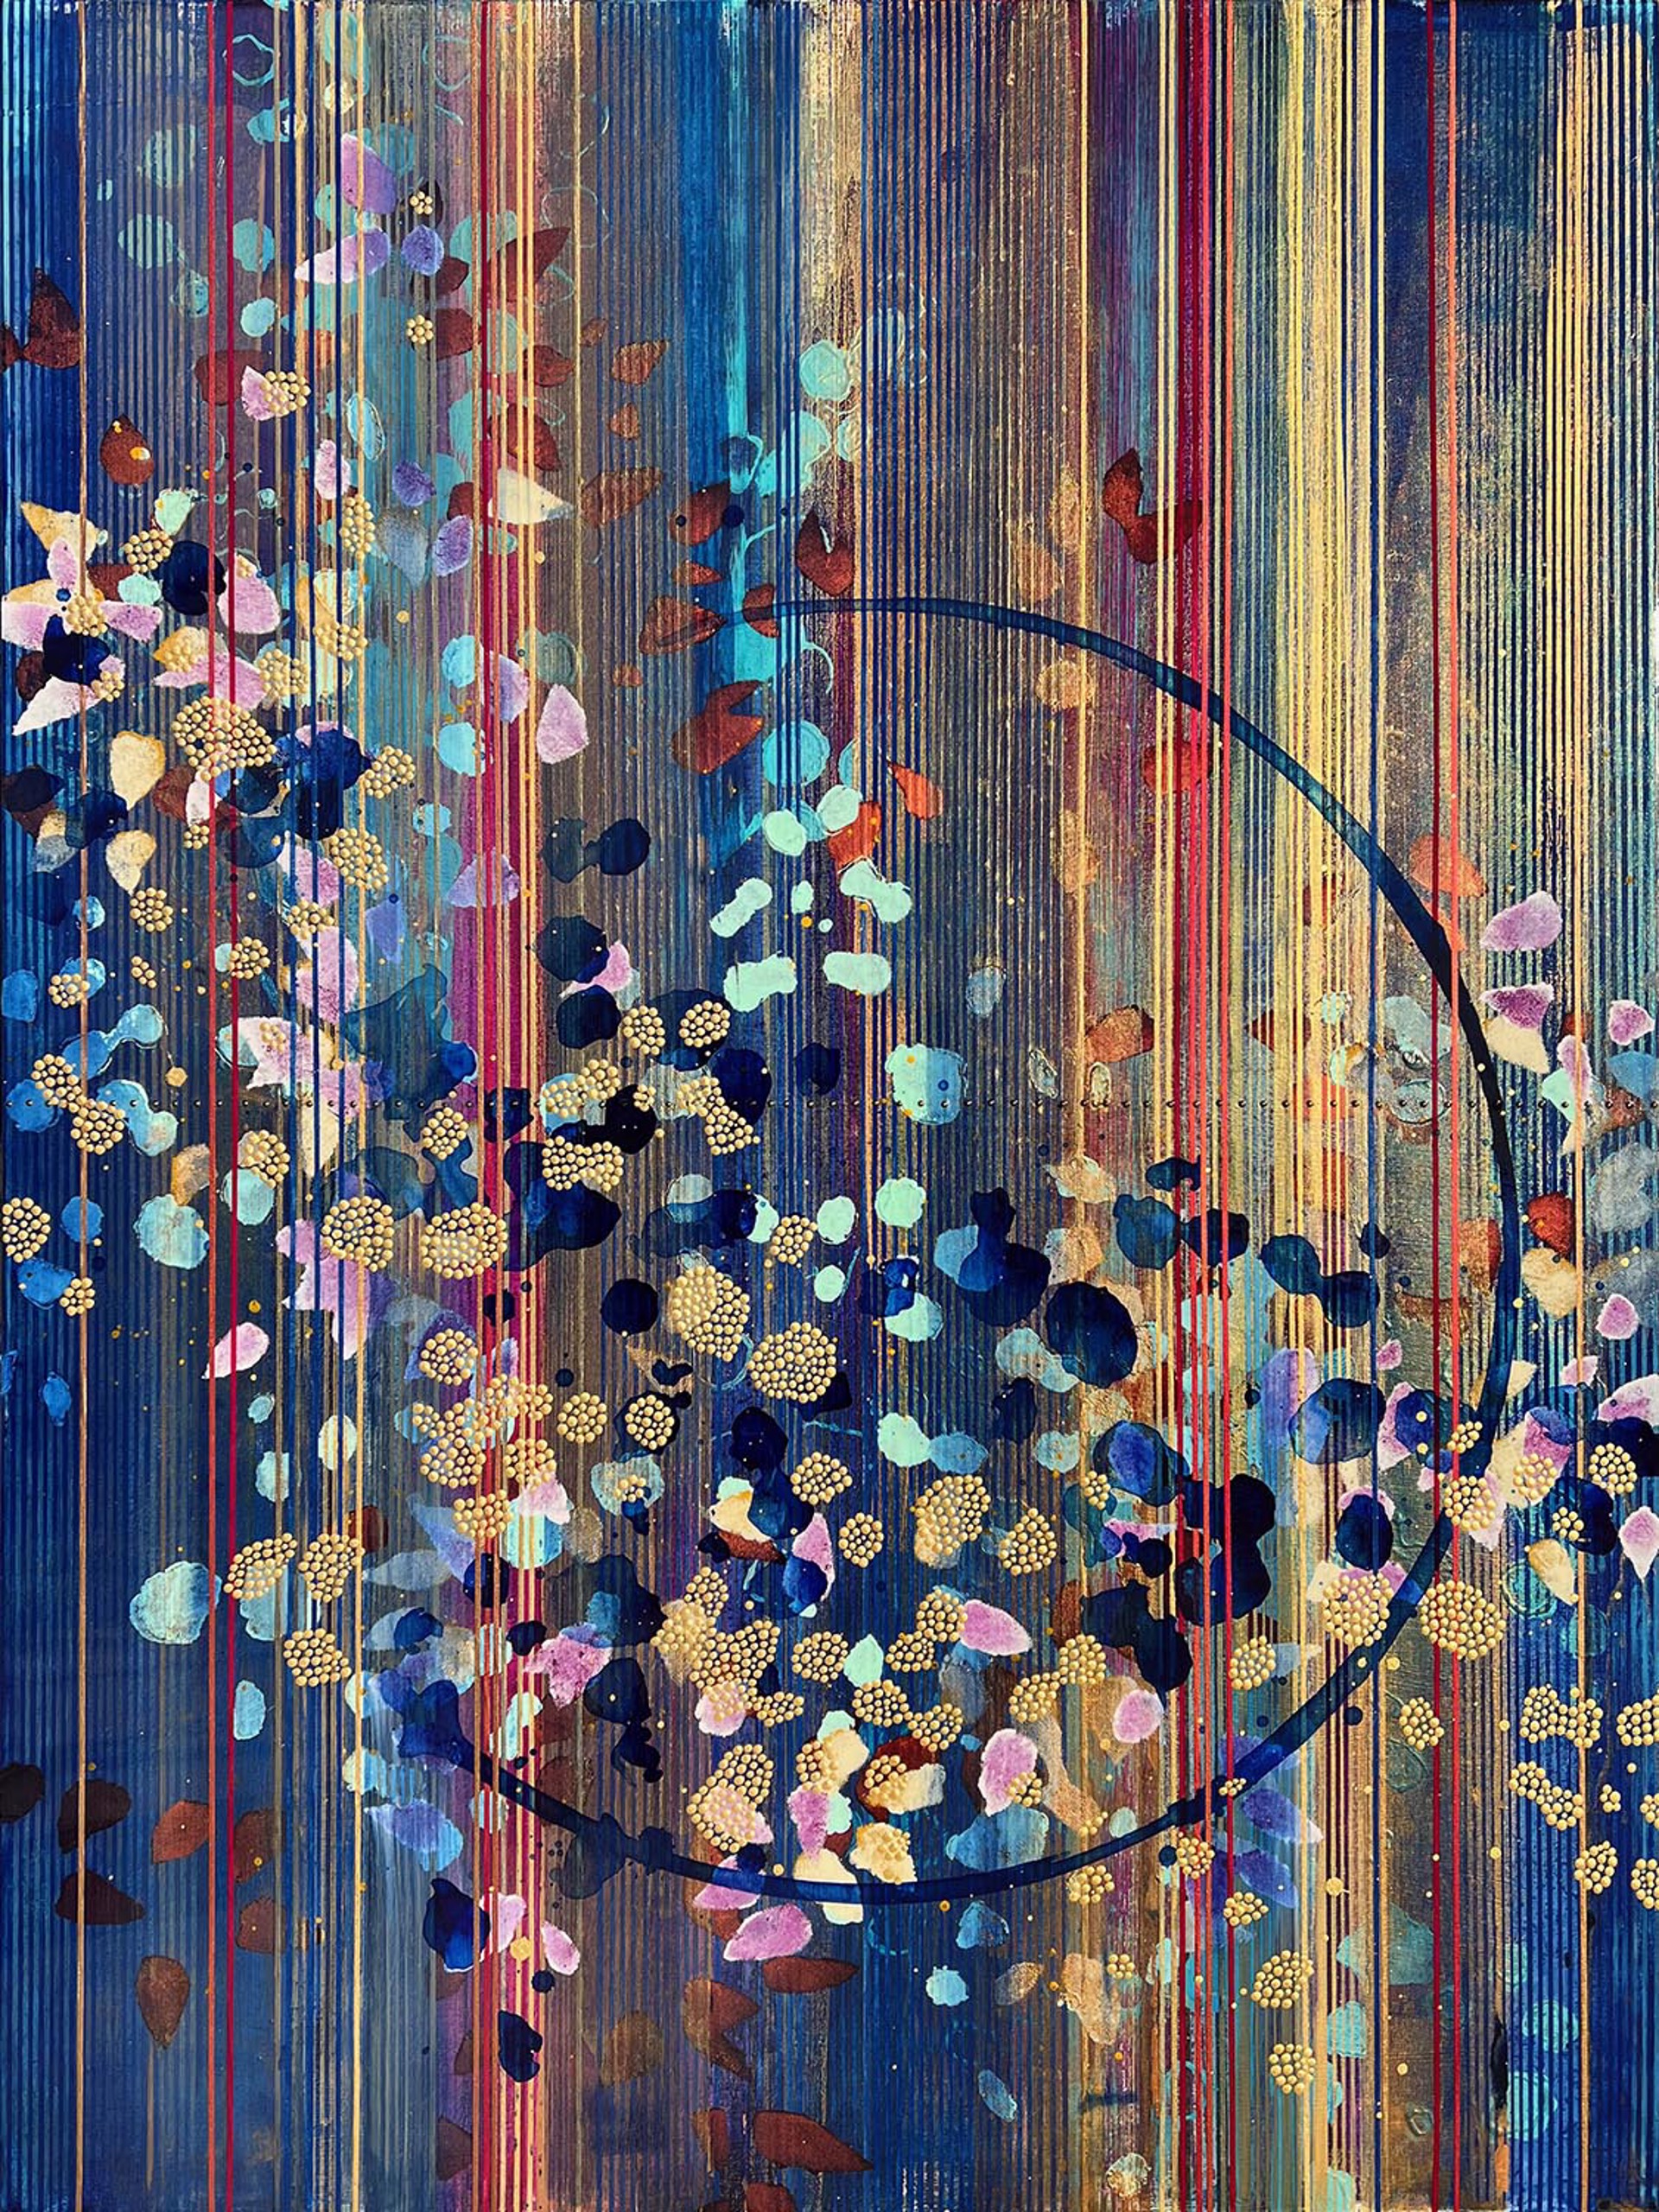 Original Mixed Media Abstract Painting In Blues Purples And Gold With Botanical Motifs